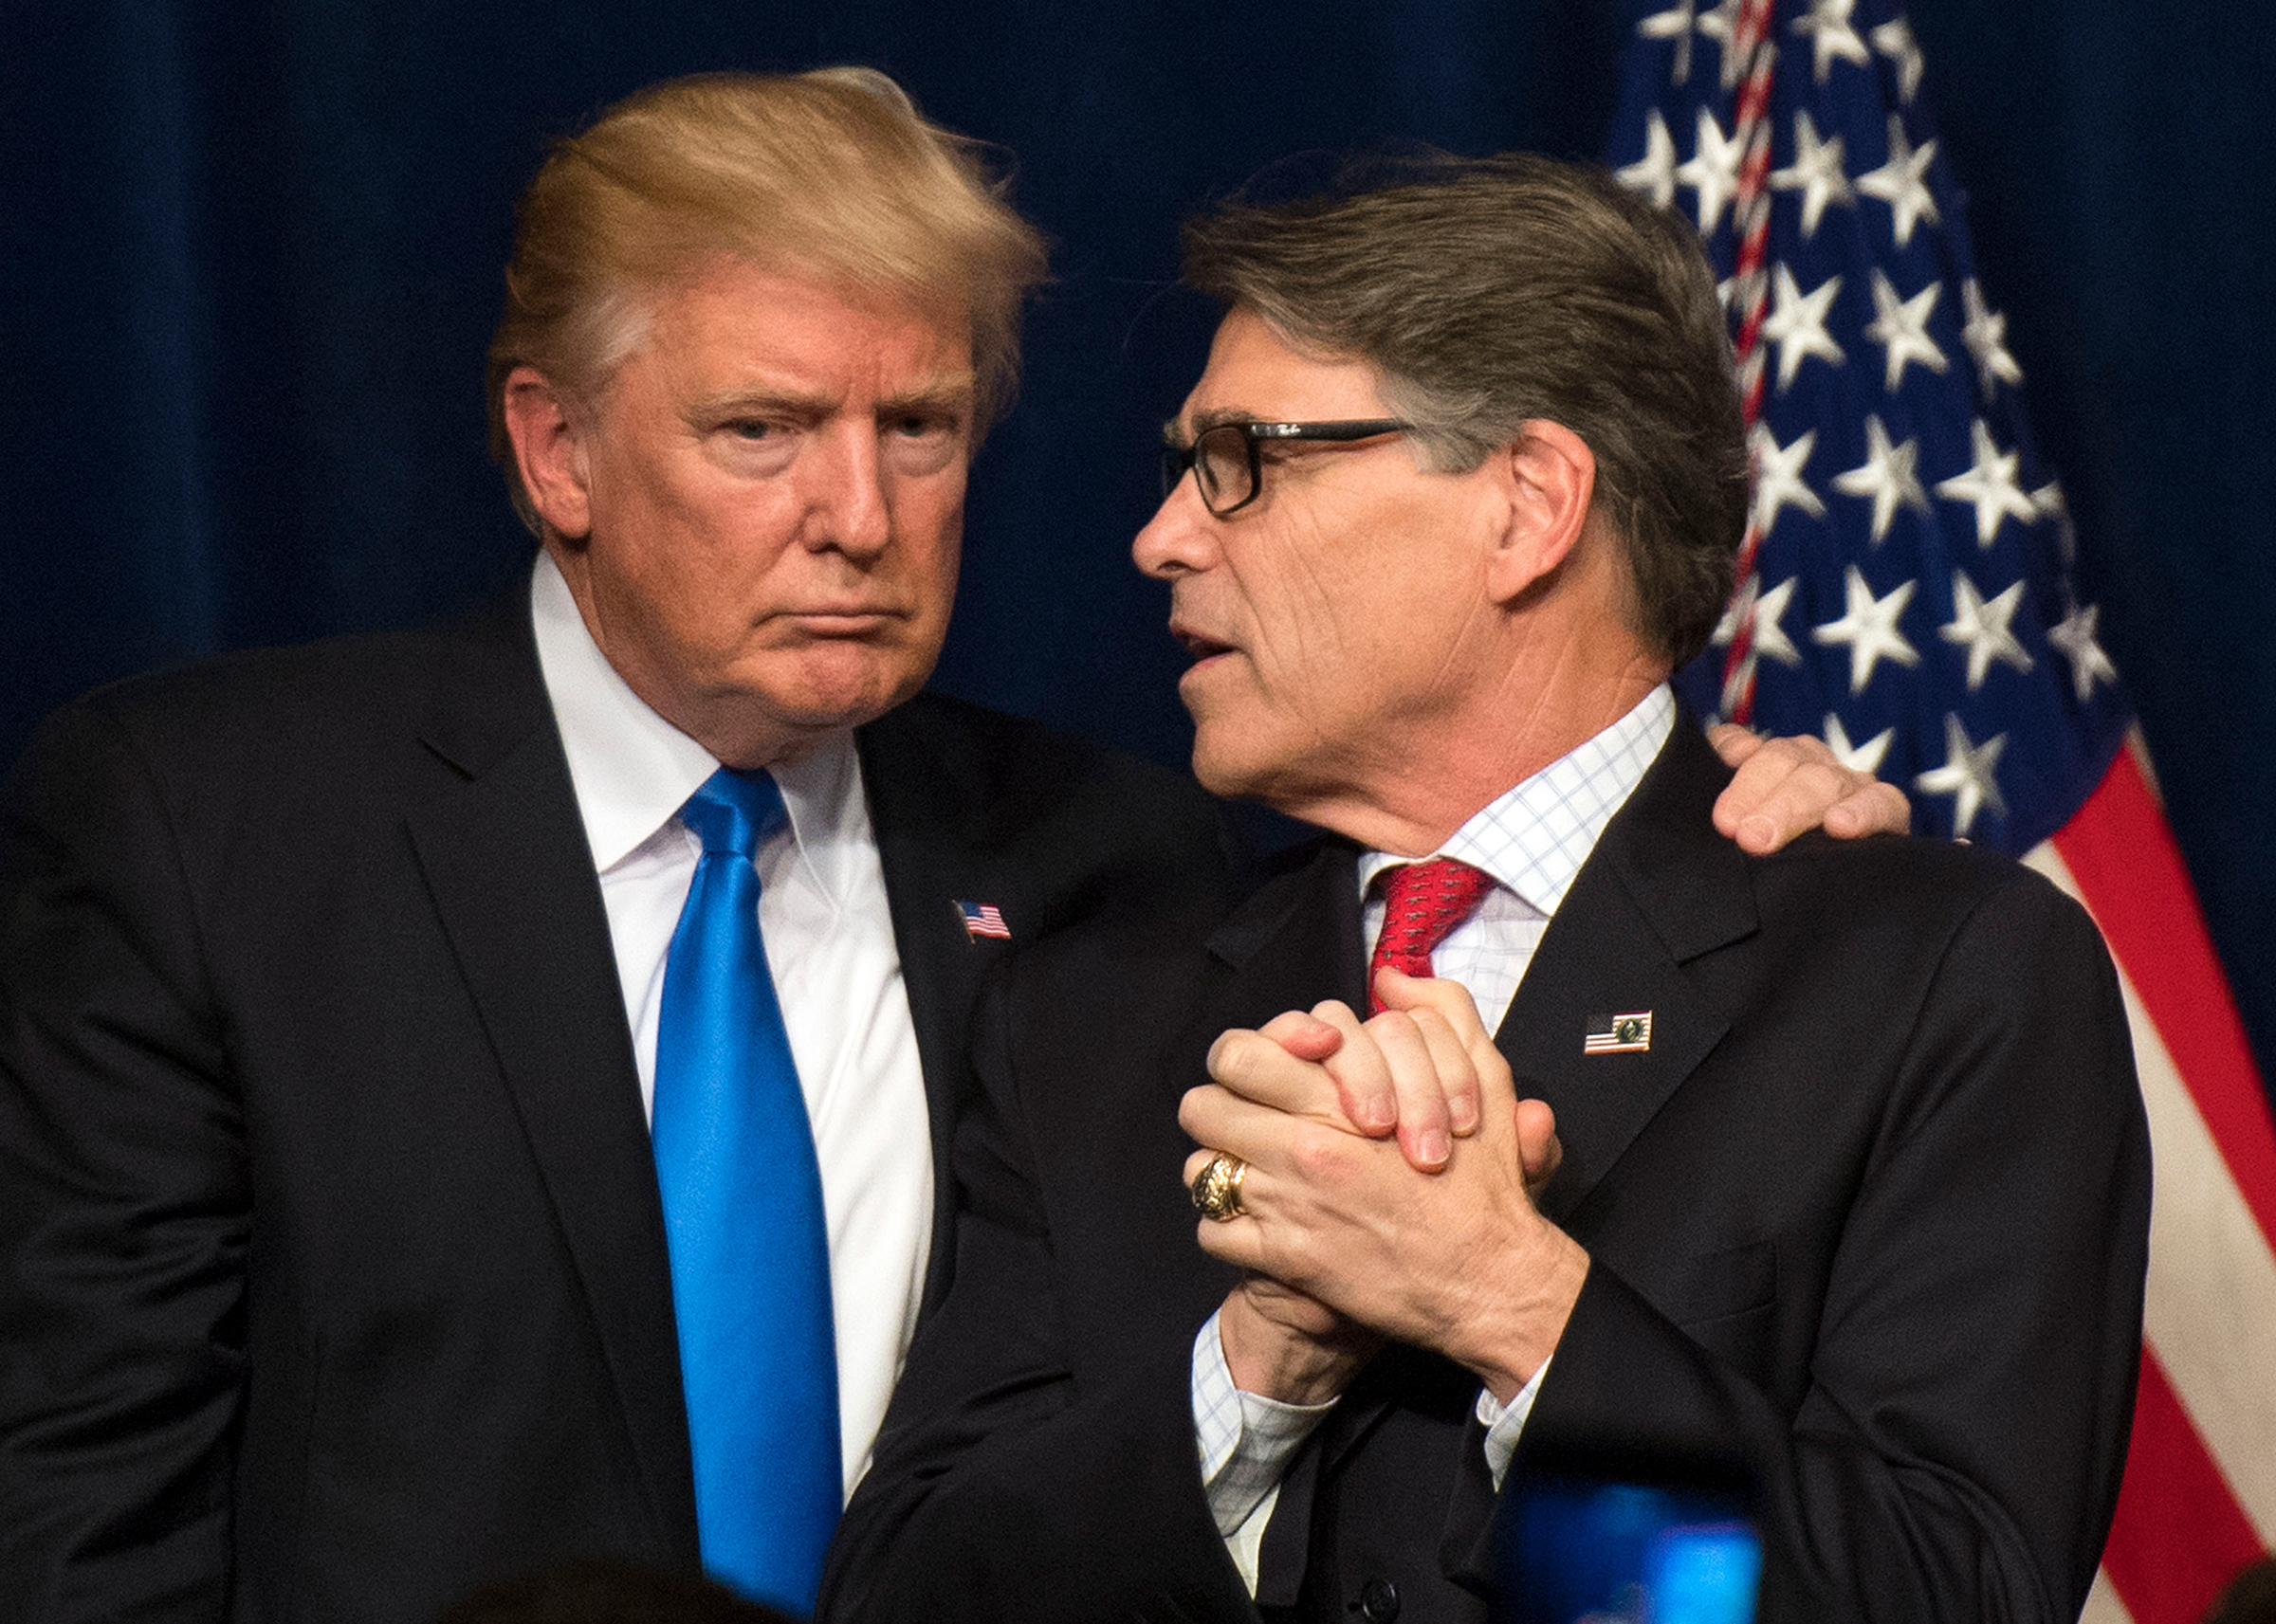 Trump and Perry embrace after a June 2017 event in Washington (Kevin Dietsch—UPI/Reuters)